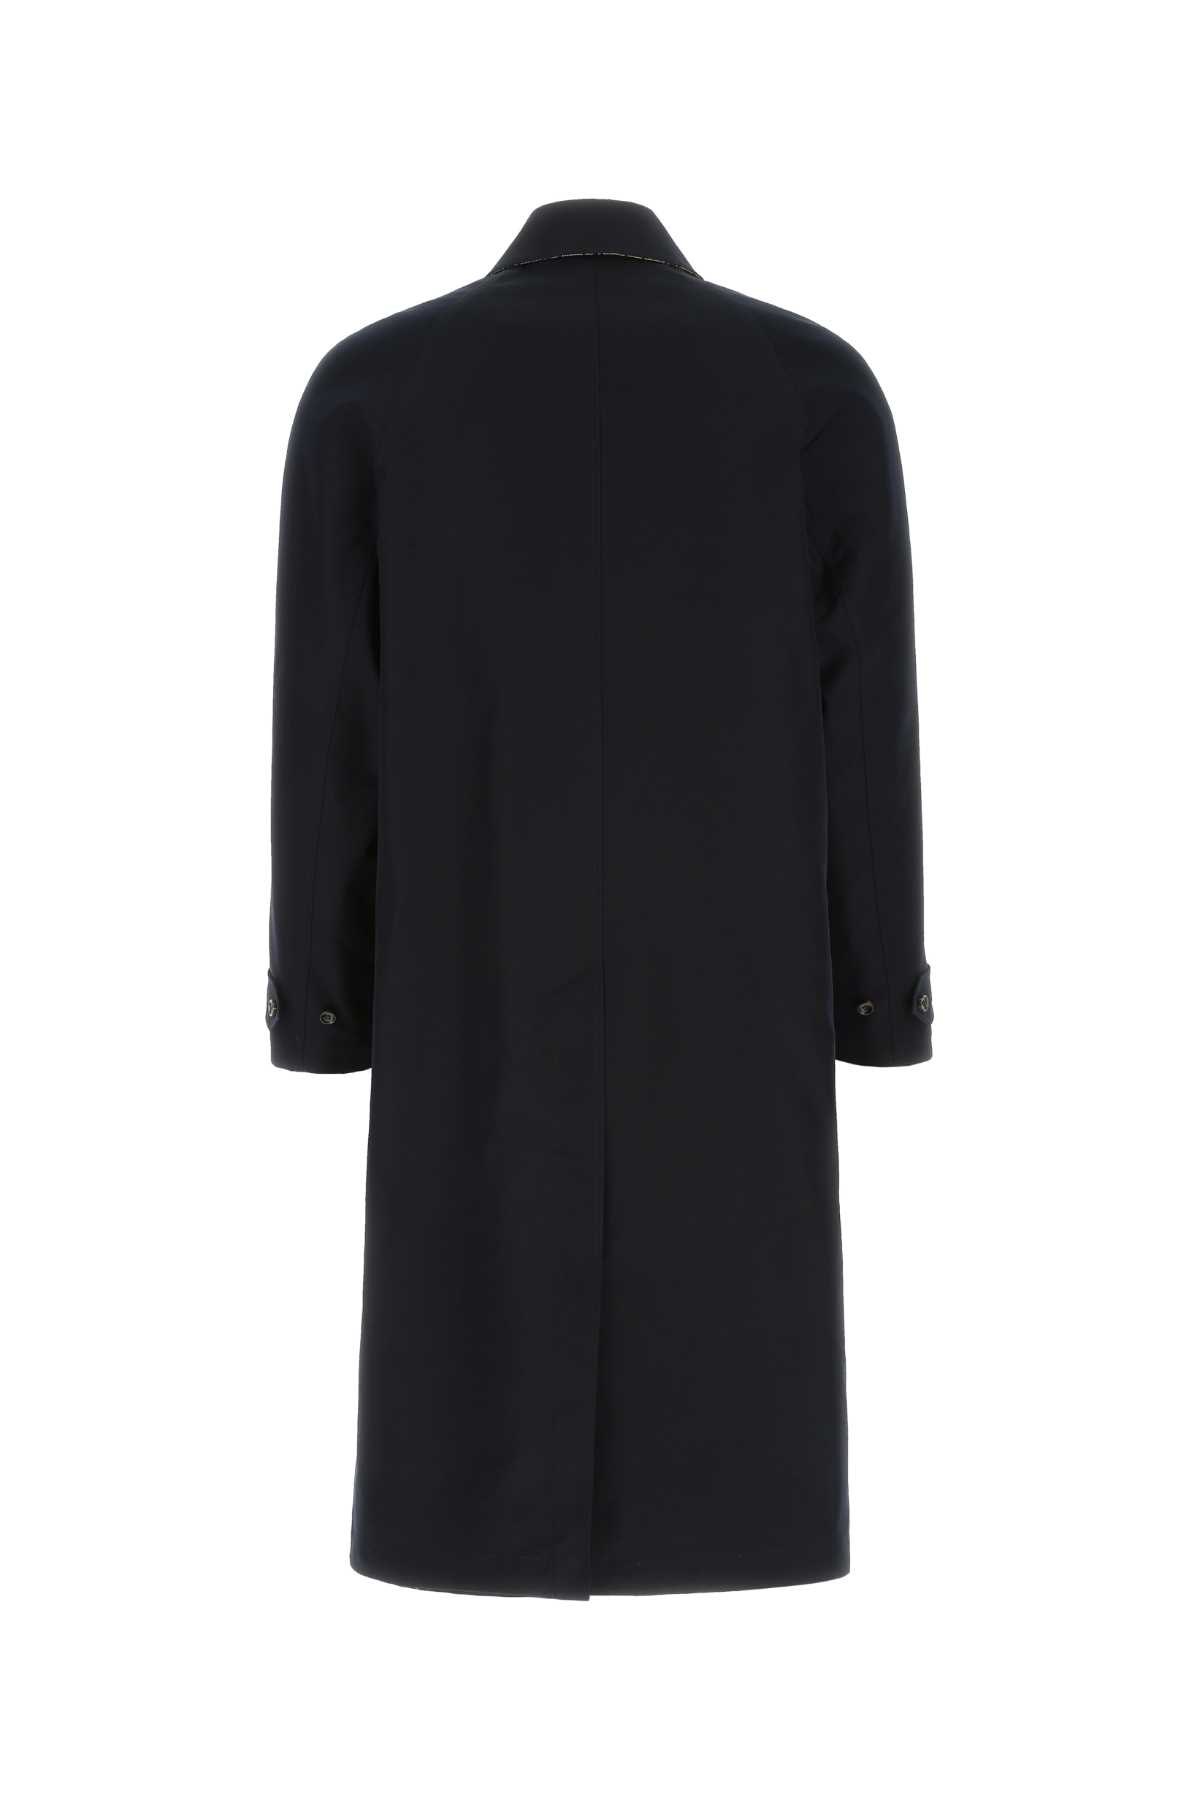 GUCCI DARK BLUE POLYESTER TRENCH COAT